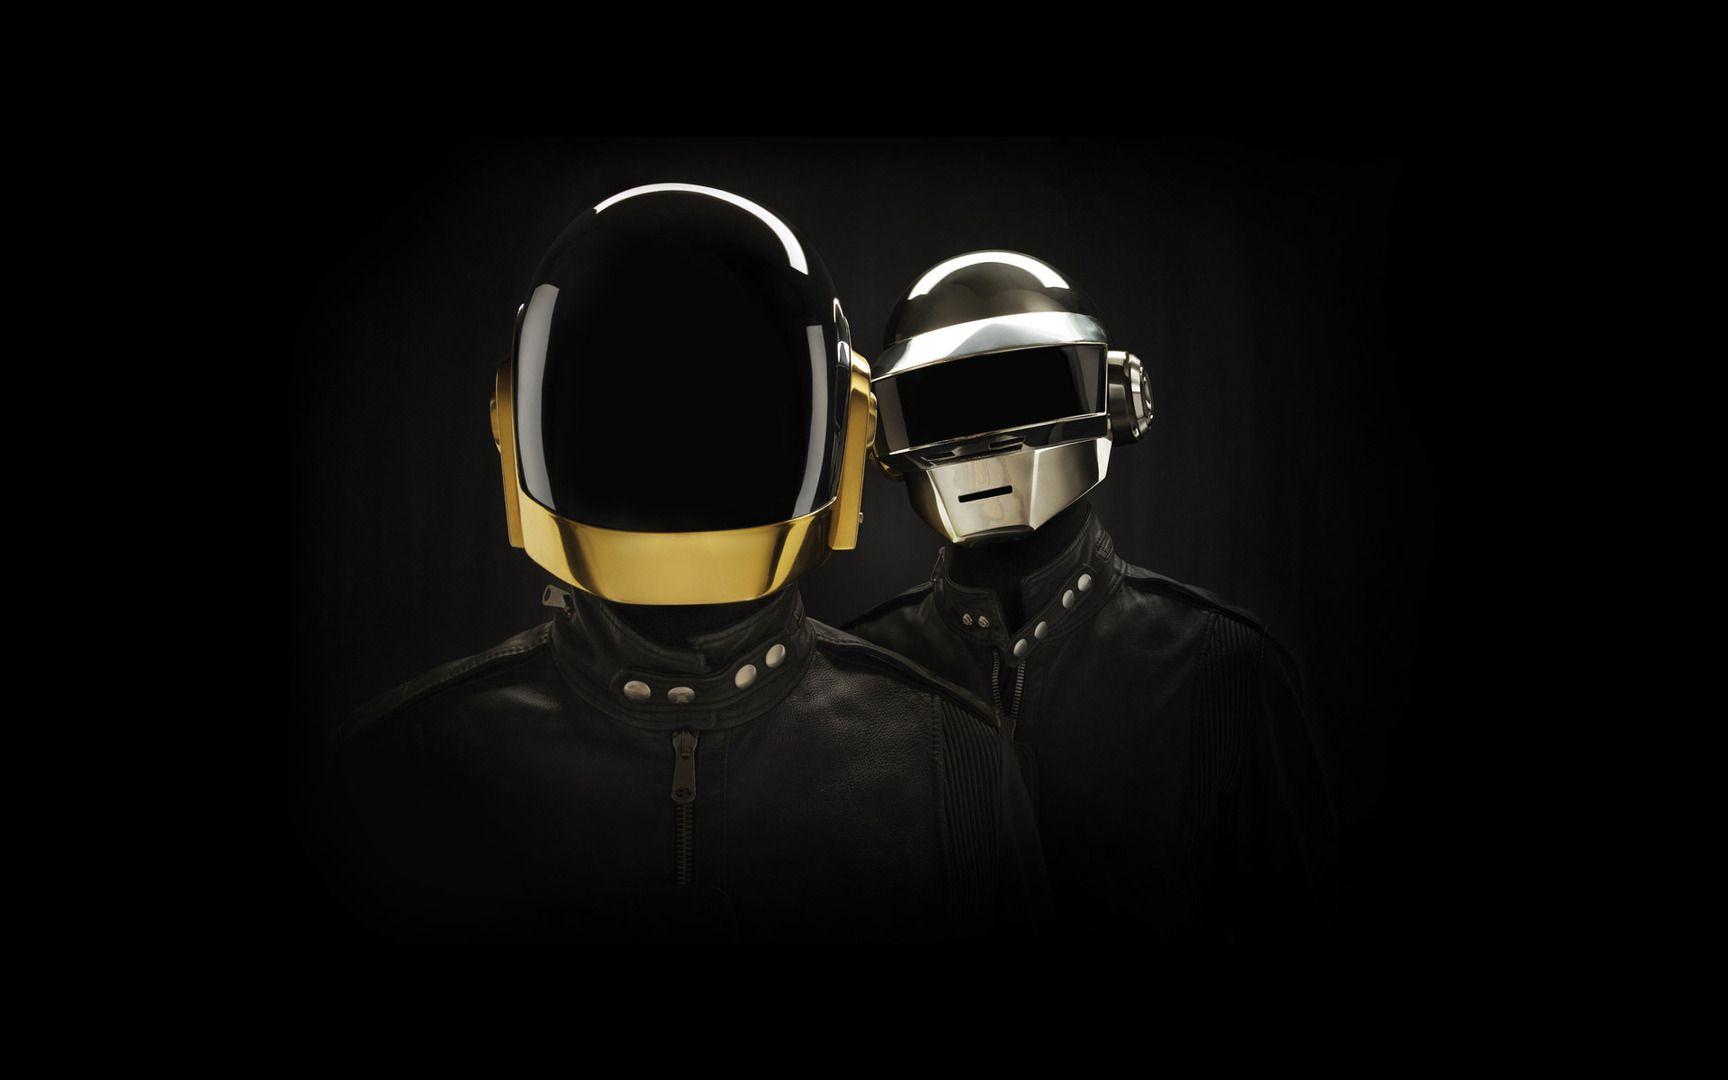 Daft Punk Hd Wallpapers Music Wallpapers Source 1728x1080PX